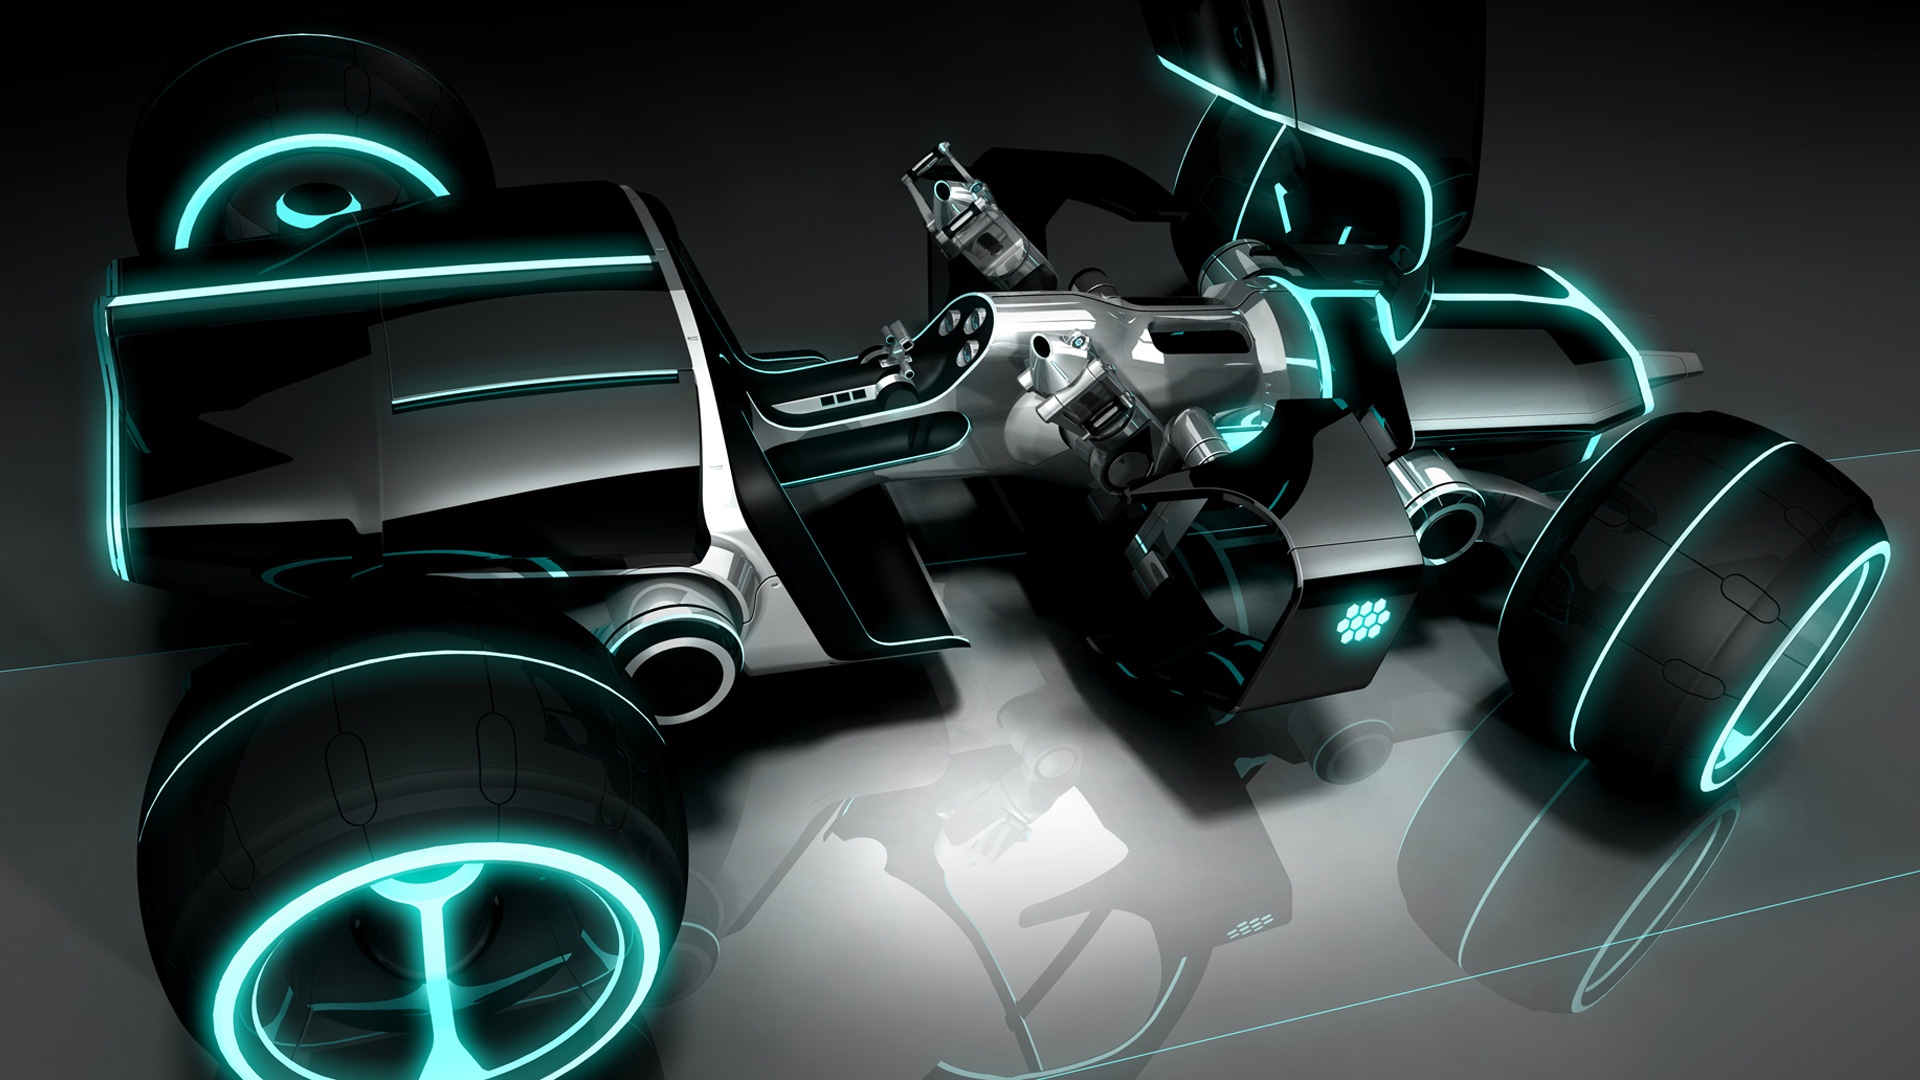 Tron legacy light Car 1920x1080 Wallpapers - 9to5 Car Wallpapers